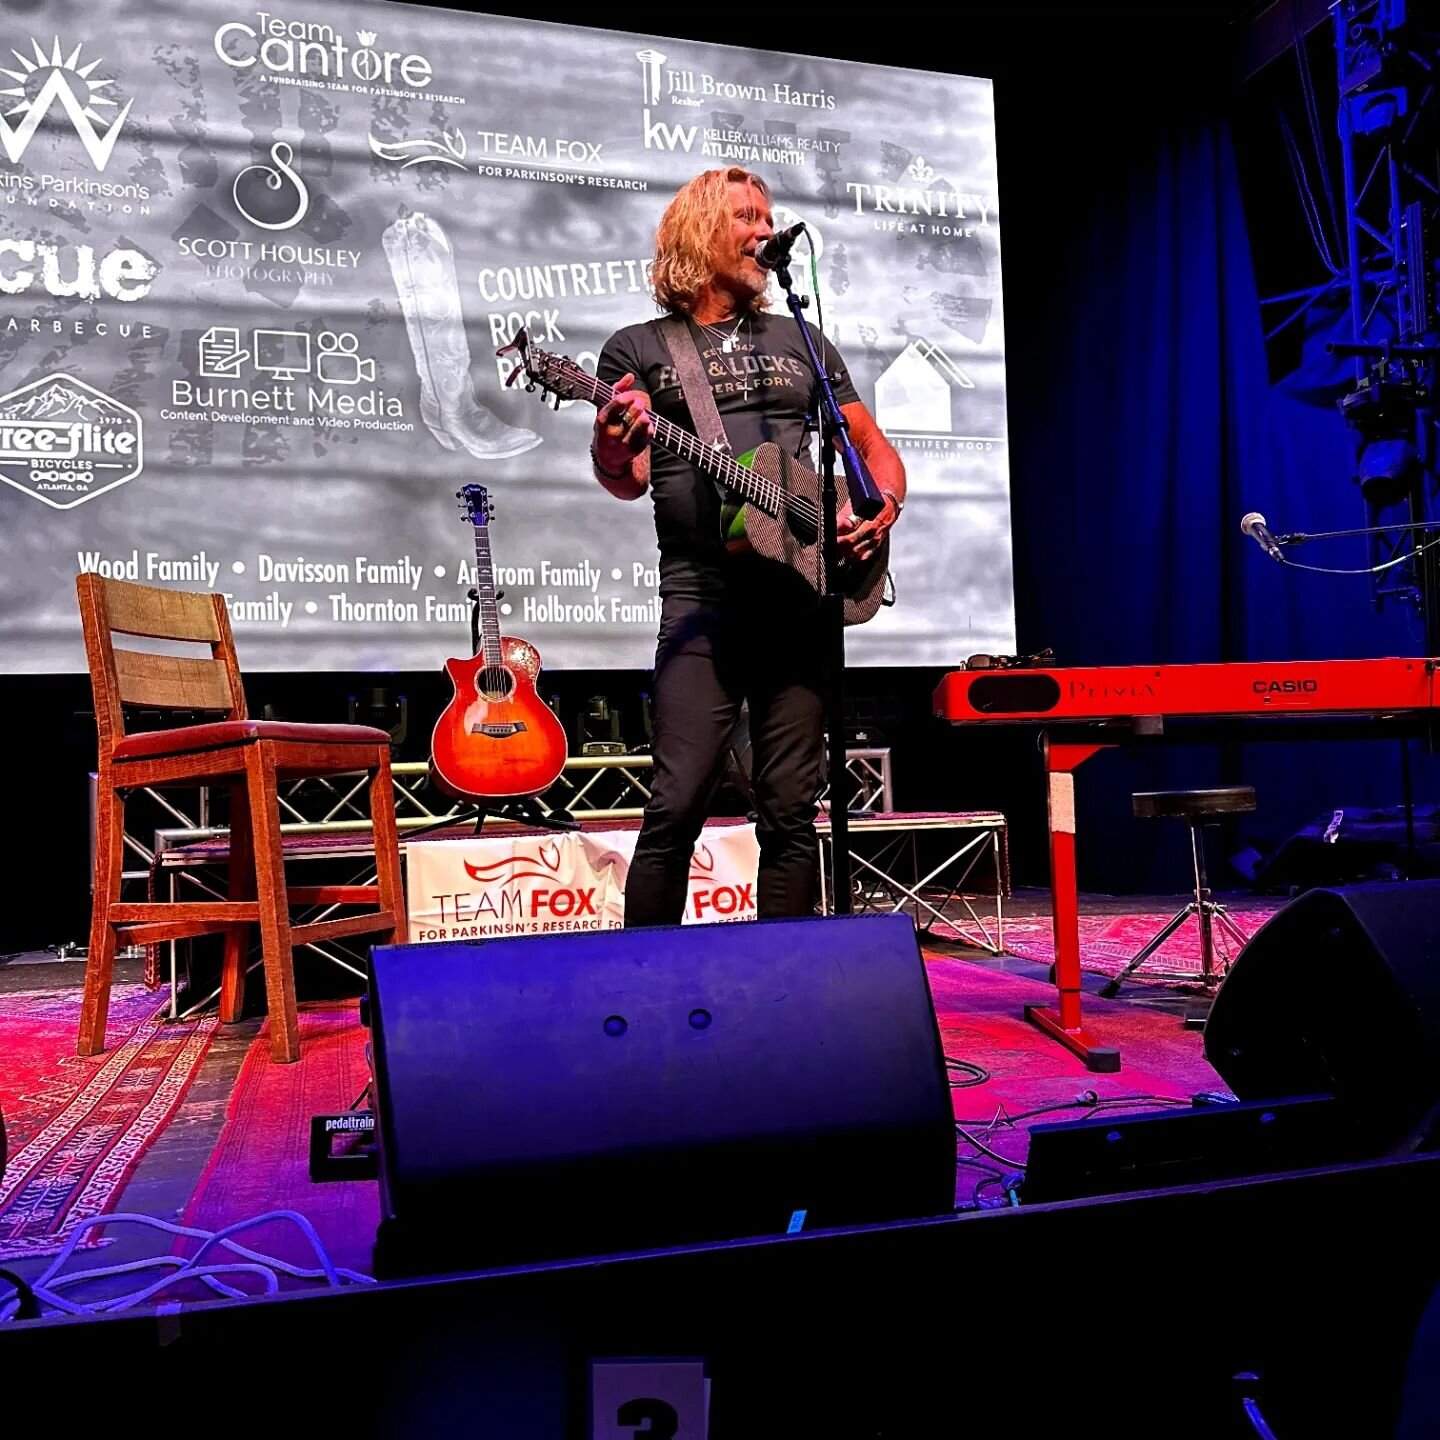 We brought back Countrified Rock for Research last night in Woodstock, GA! Thanks Team Cantore and everyone who helped make the show possible to support Parkinson's Research.